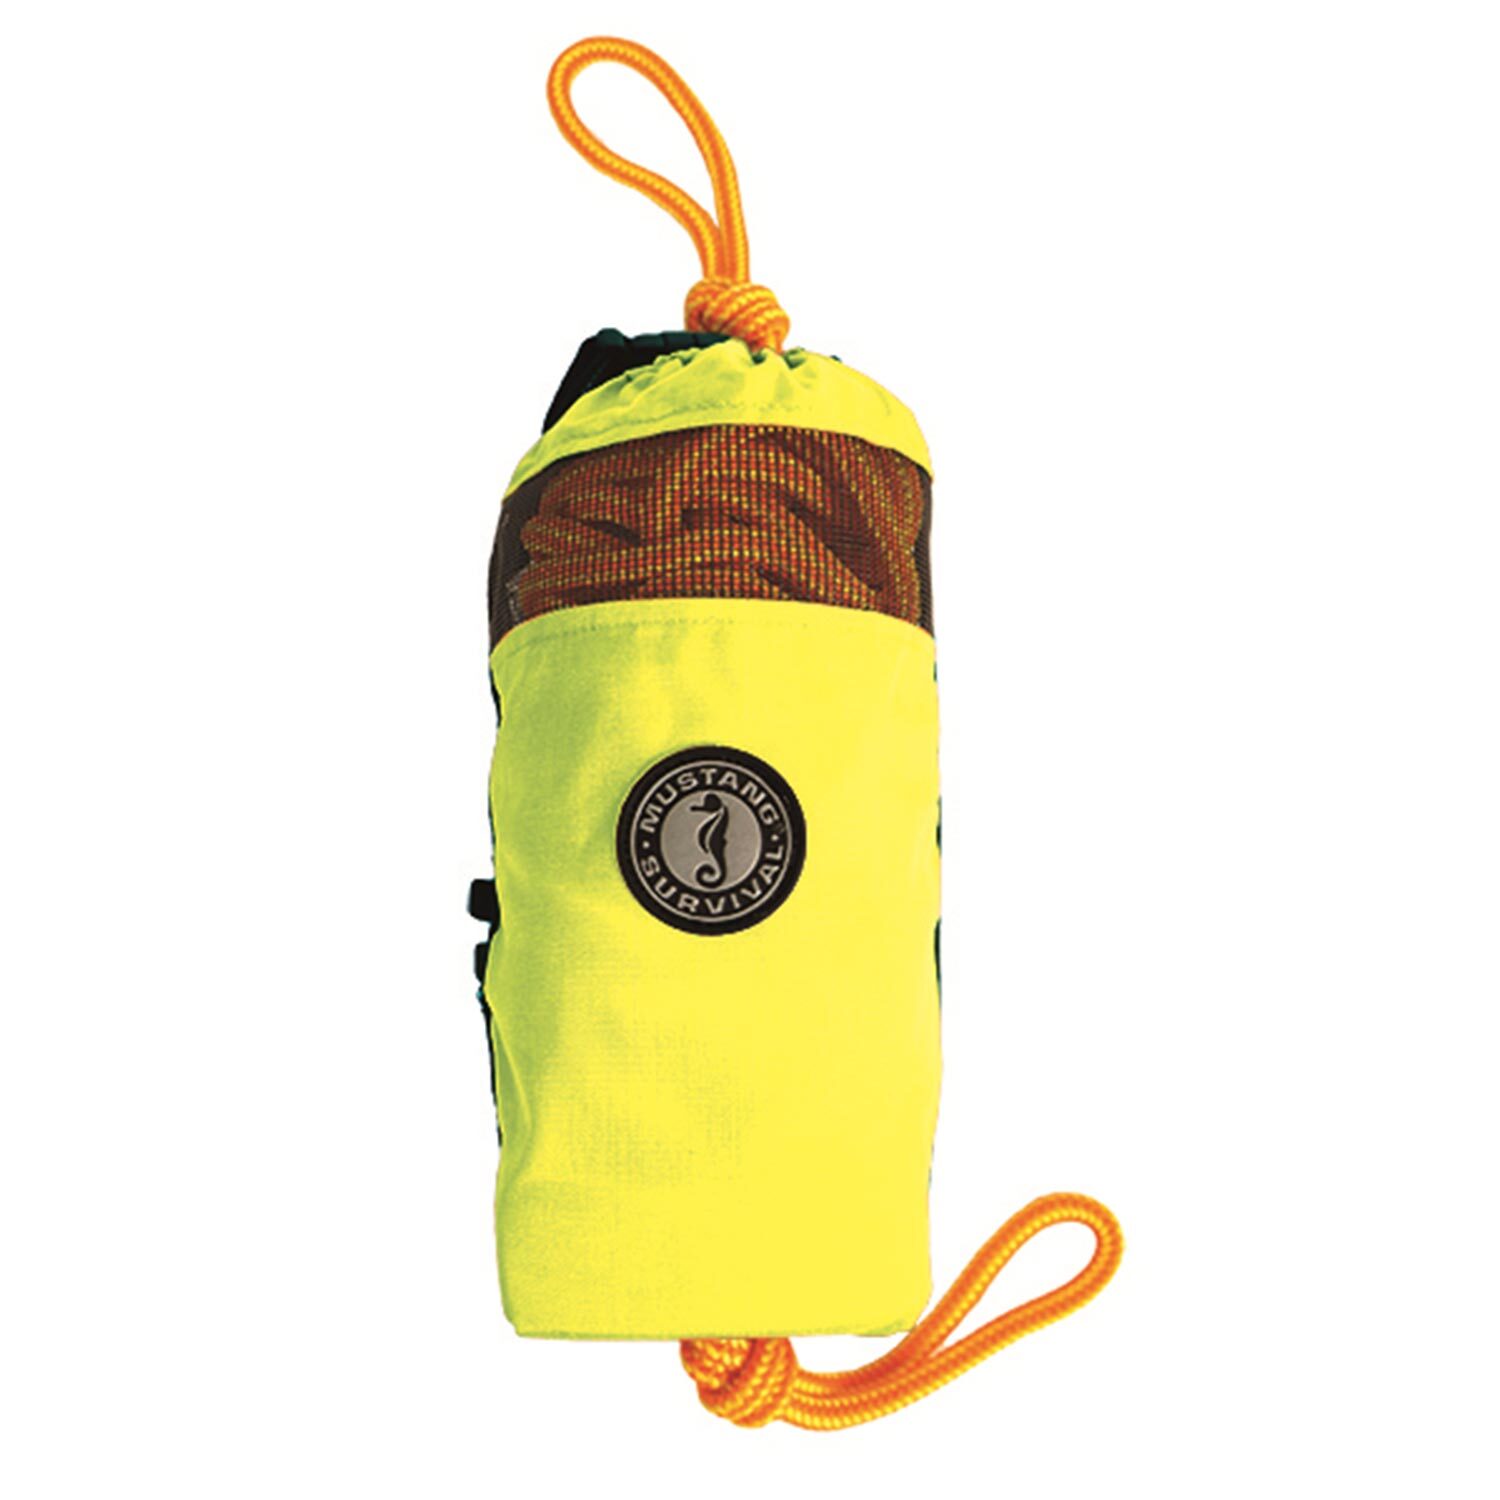 MUSTANG SURVIVAL 75' Water Rescue Professional Throw Rope